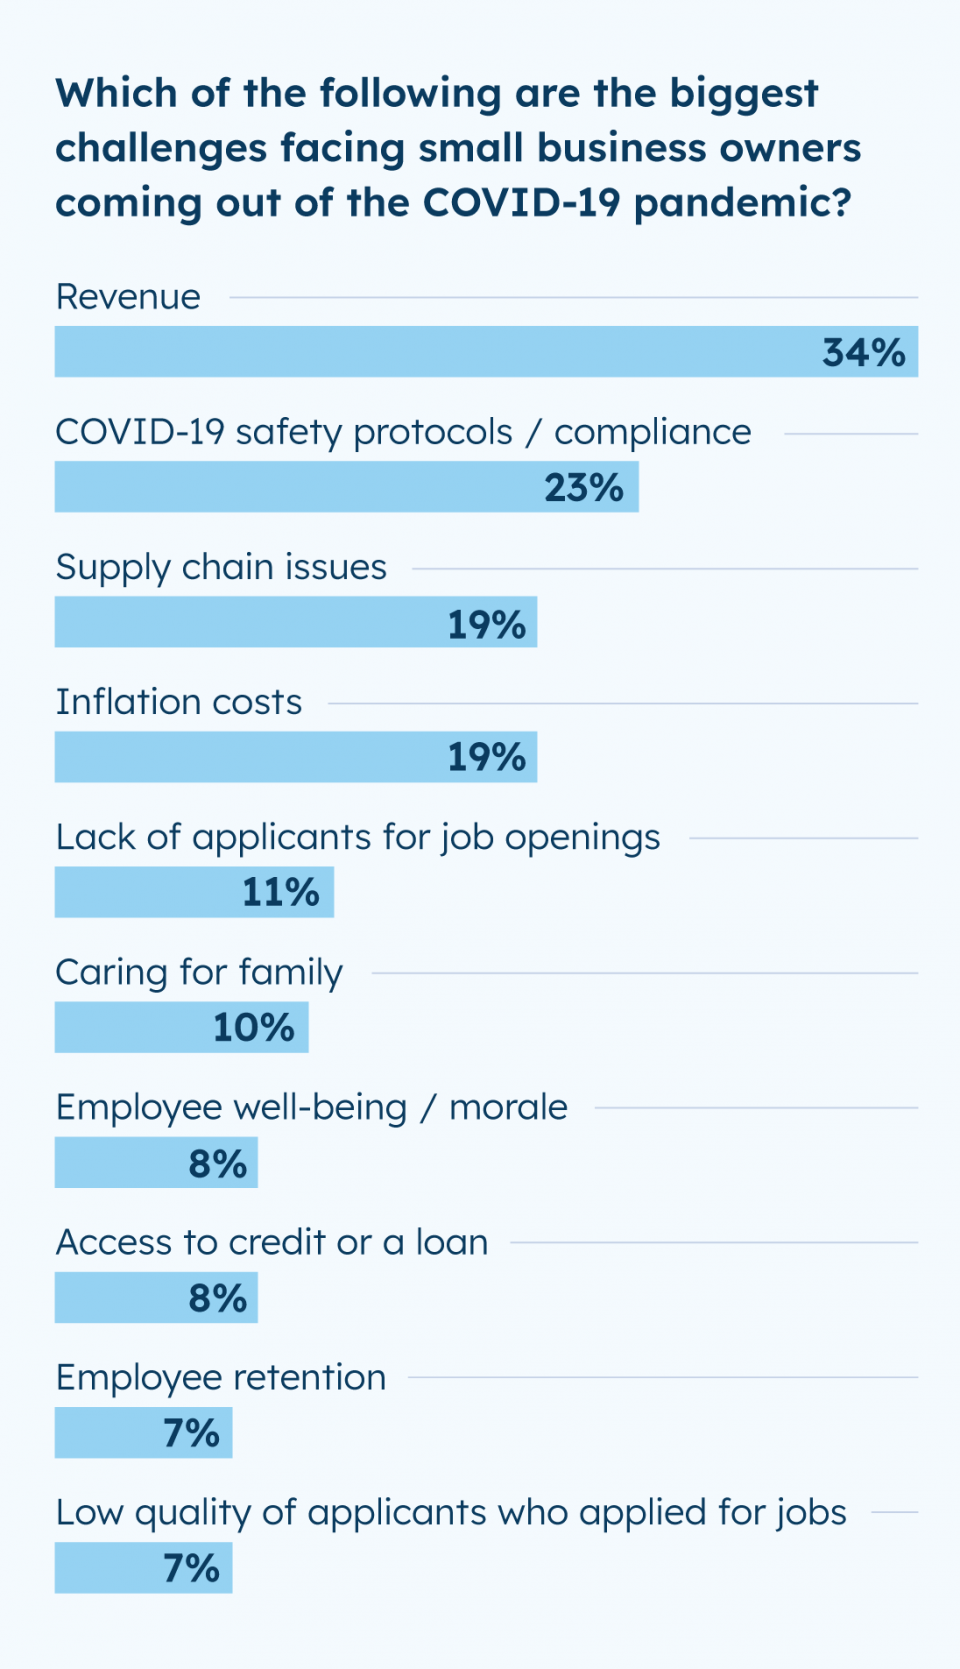 POLL: The biggest challenges facing small business owners coming out of the COVID-19 pandemic. 